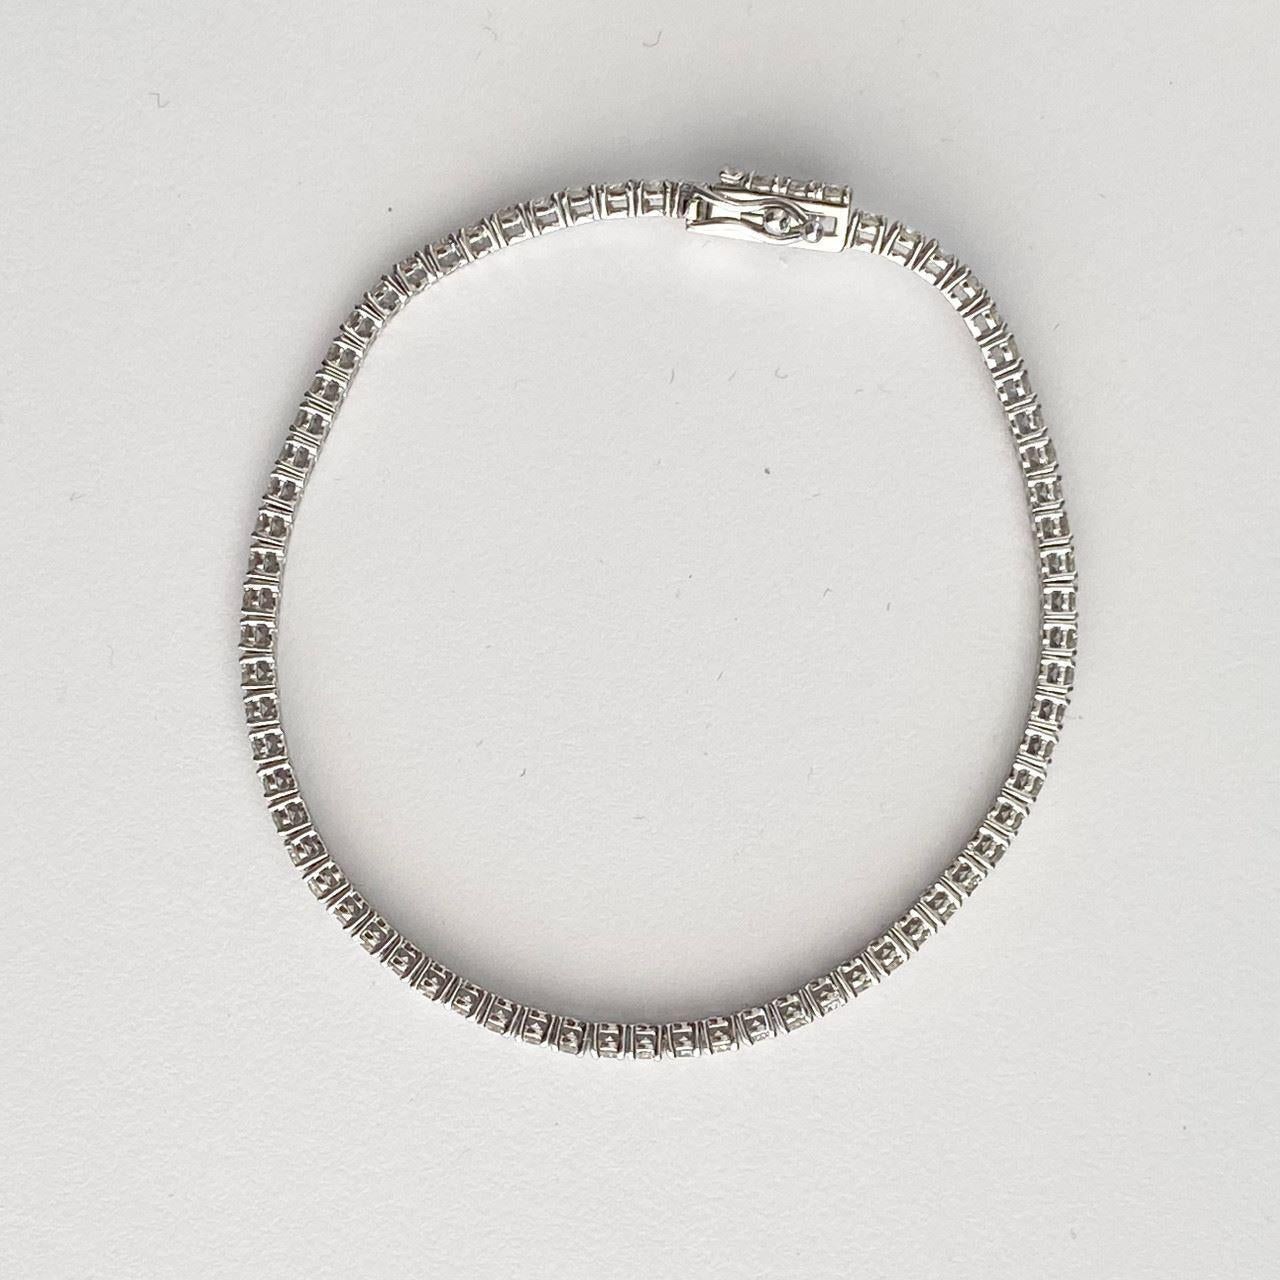 Contemporary 14k White Gold Diamond Tennis Bracelet Weighing 3.65ctw For Sale